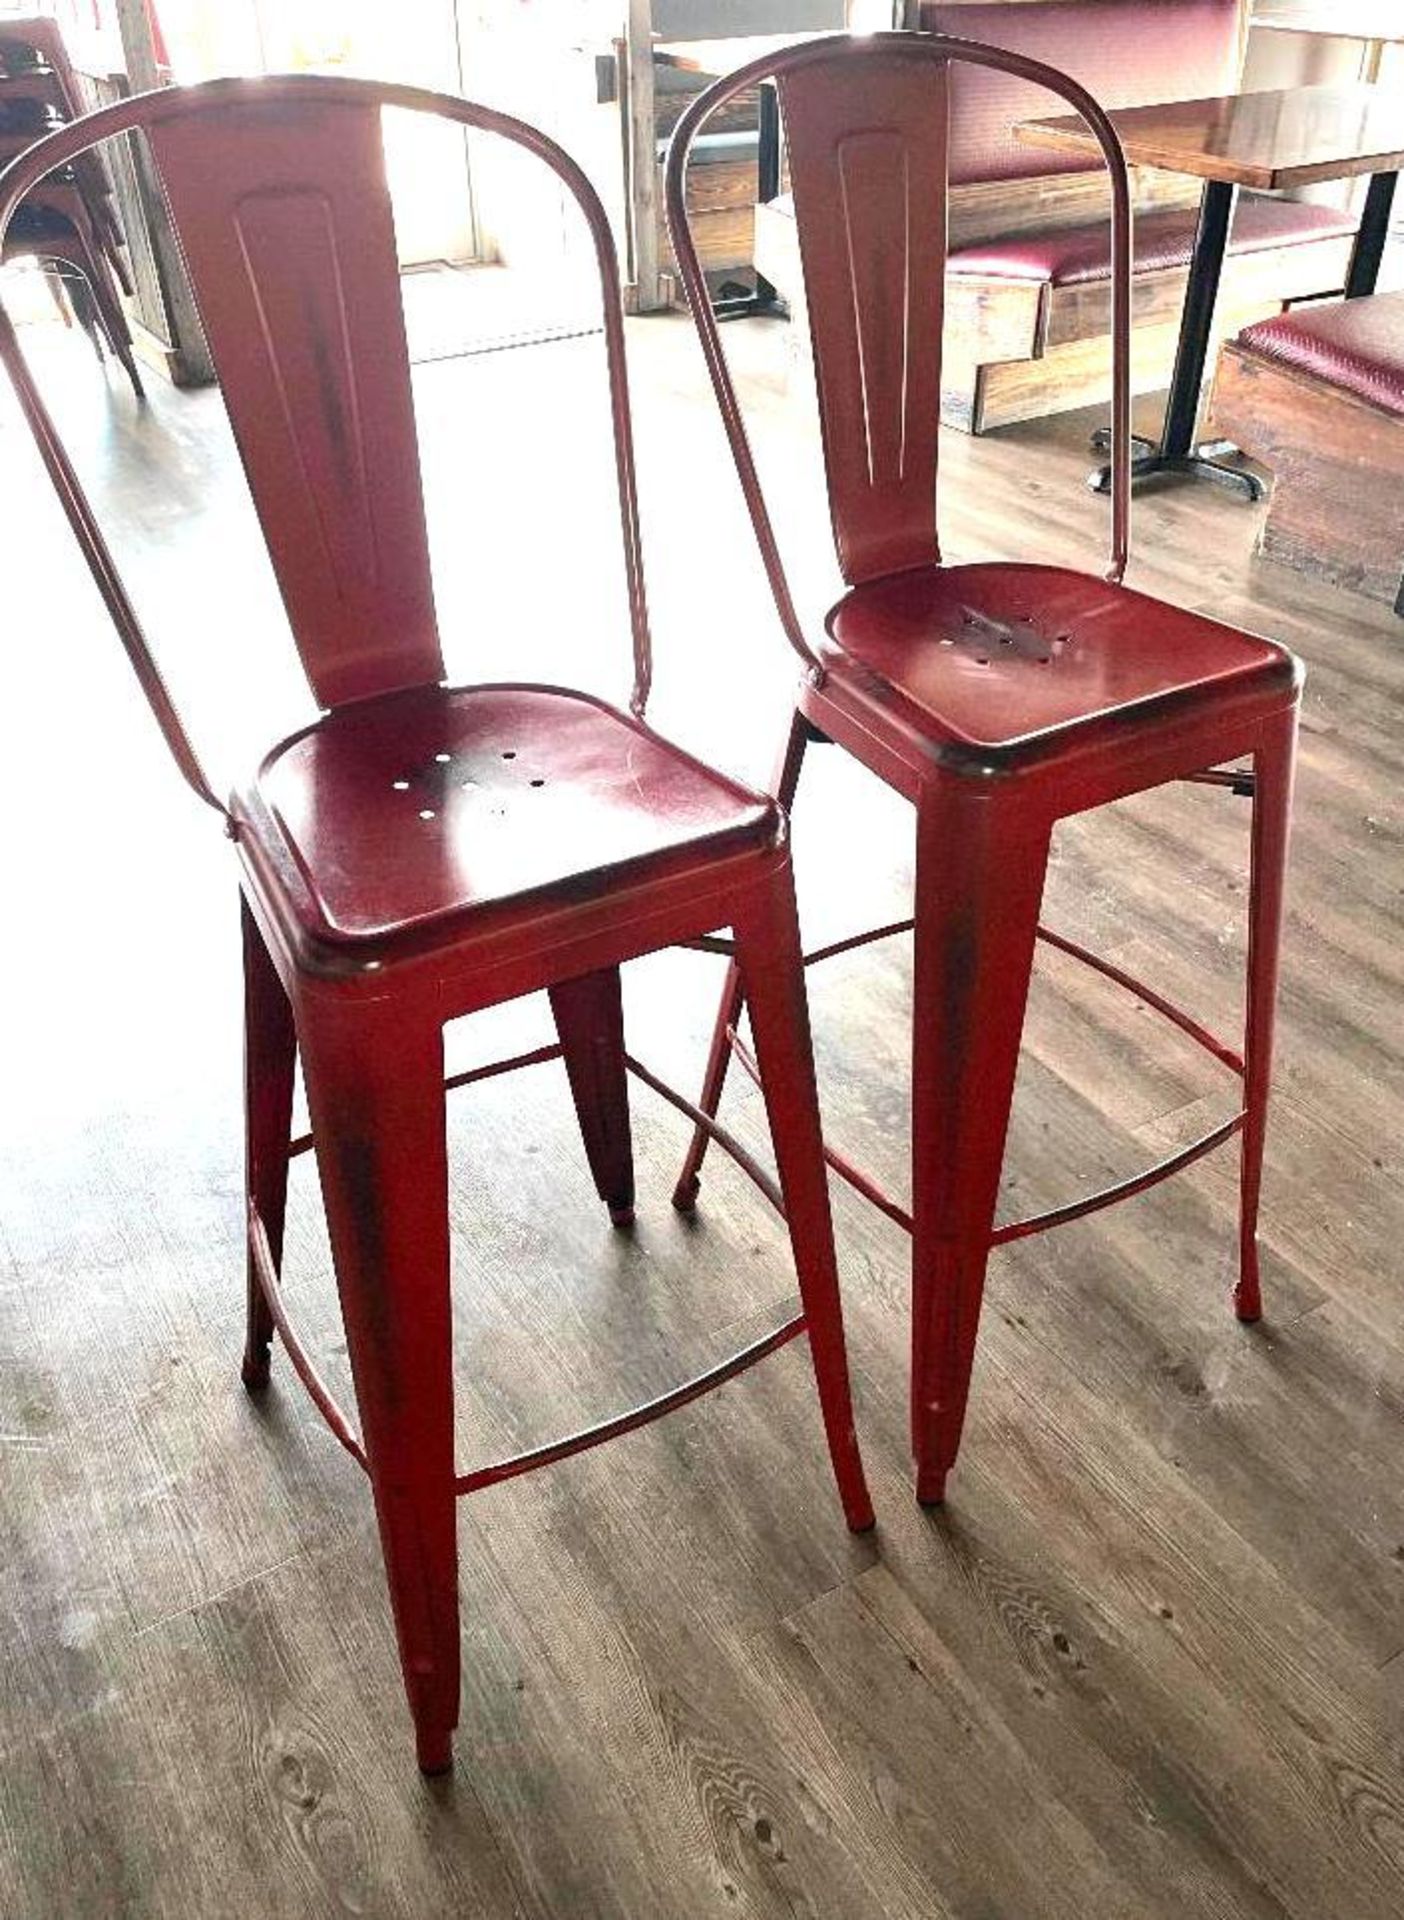 DESCRIPTION: (2) 30" METAL BAR STOOLS ADDITIONAL INFORMATION FADED TABASCO LOCATION: SEATING THIS LO